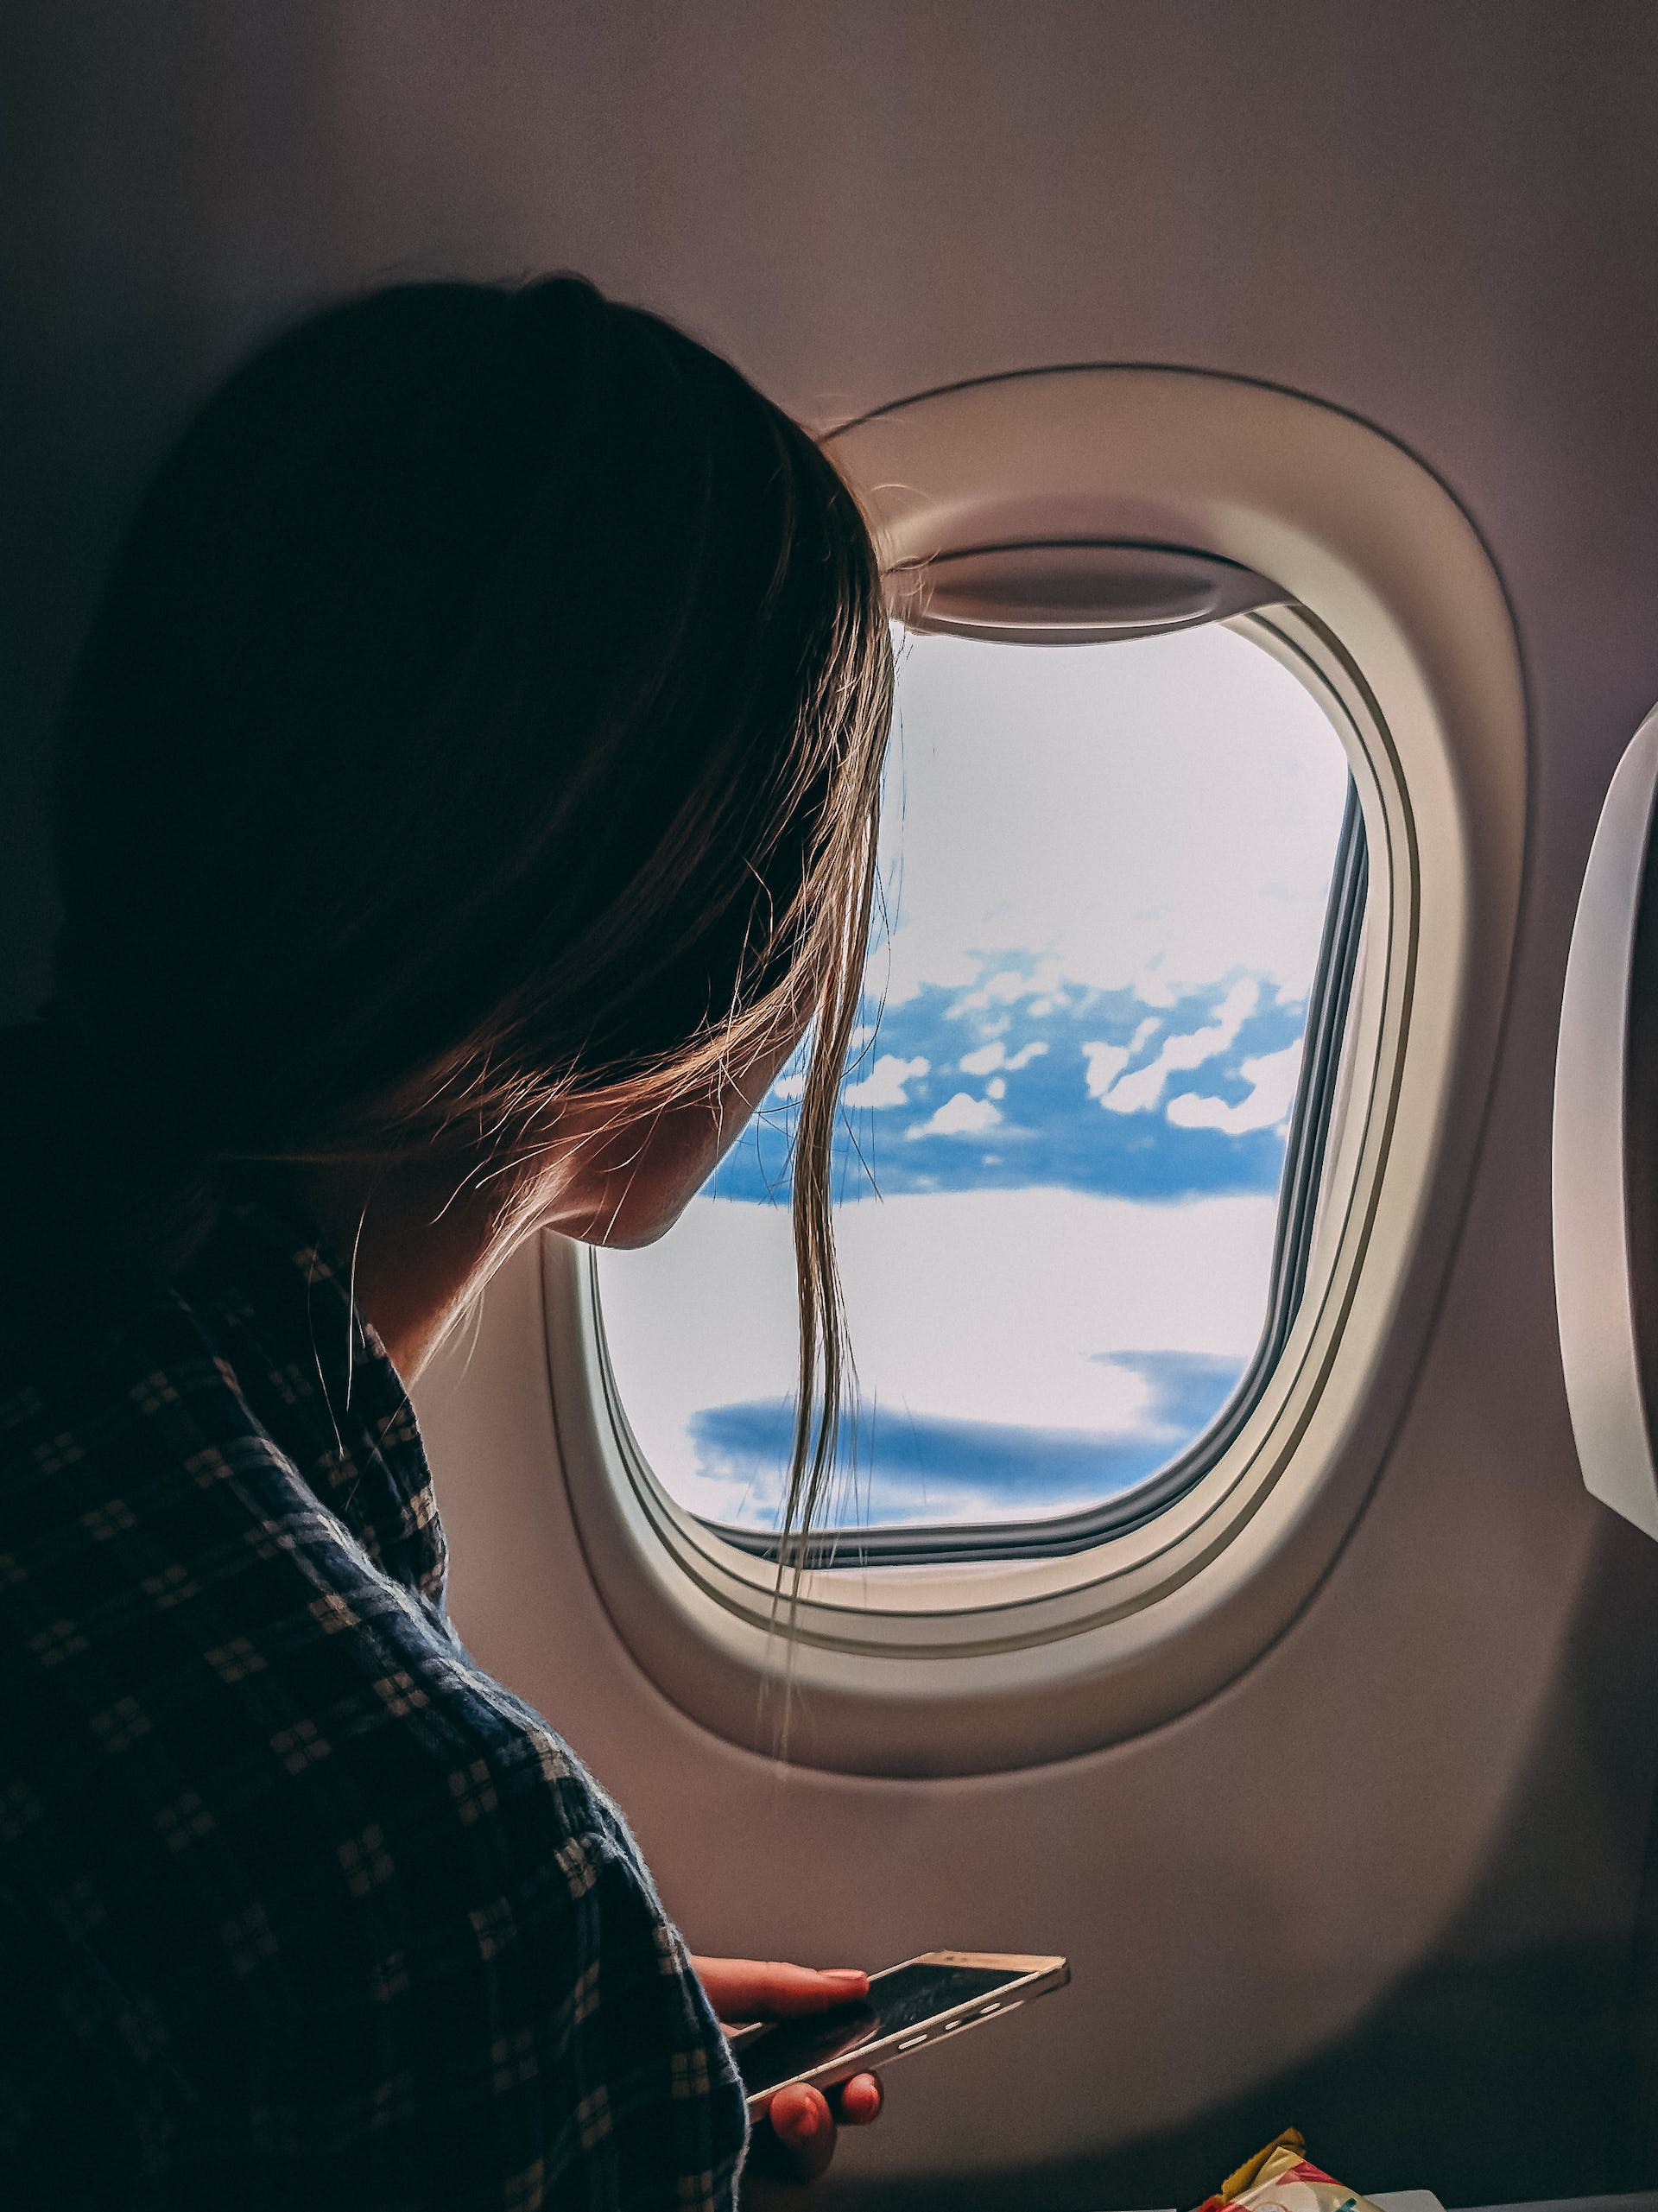 A woman looking outside an airplane window | Source: Pexels